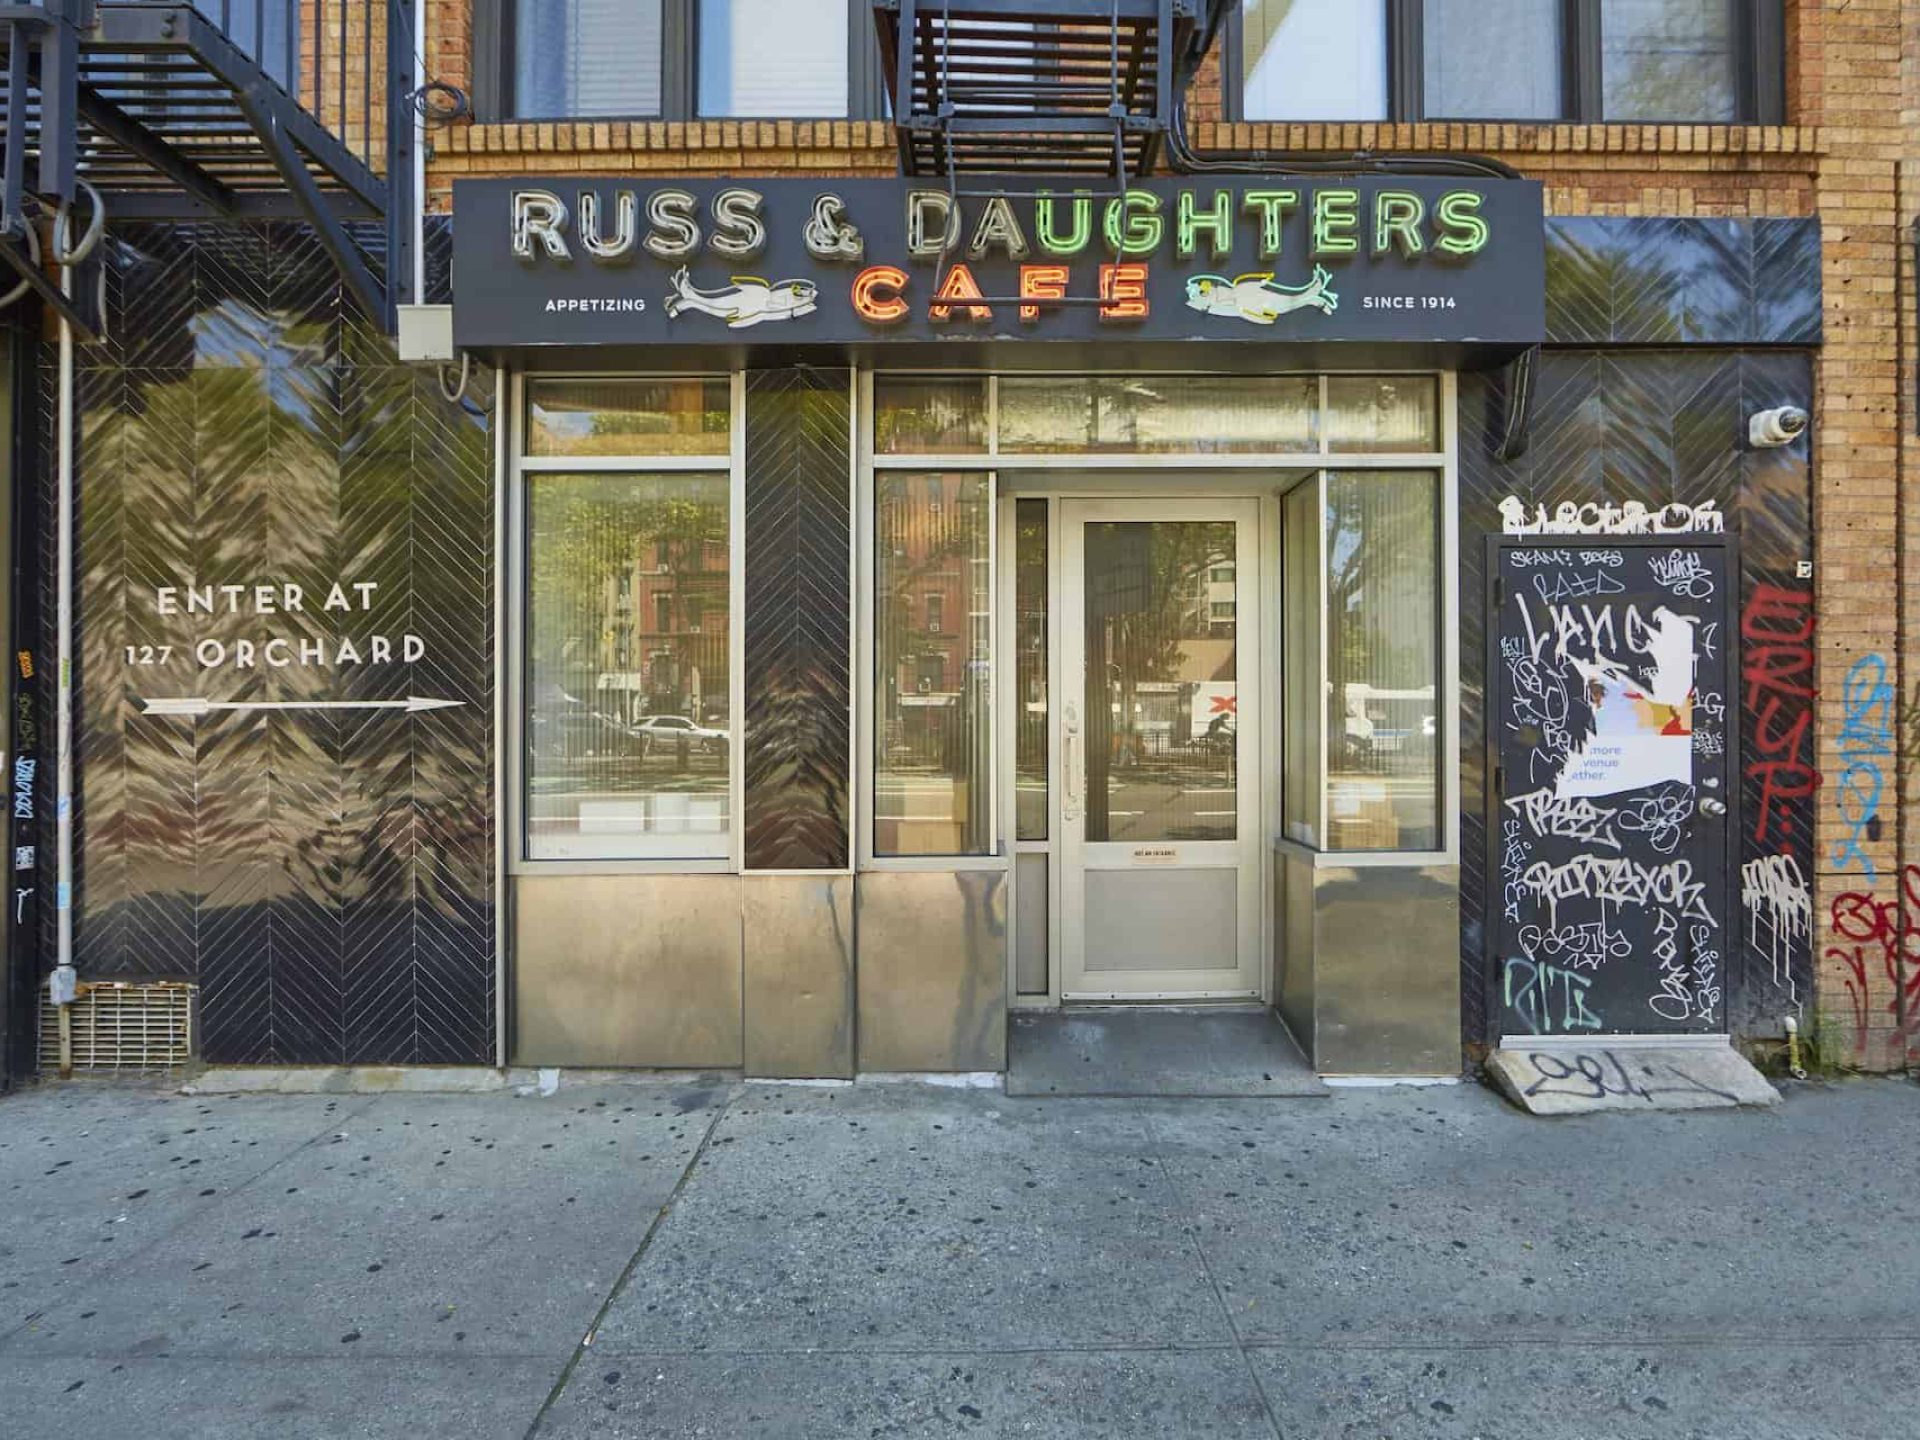 Entrance to Russ & Daughters Cafe in New York. Neon sign above building door, large windows and metal paneling.